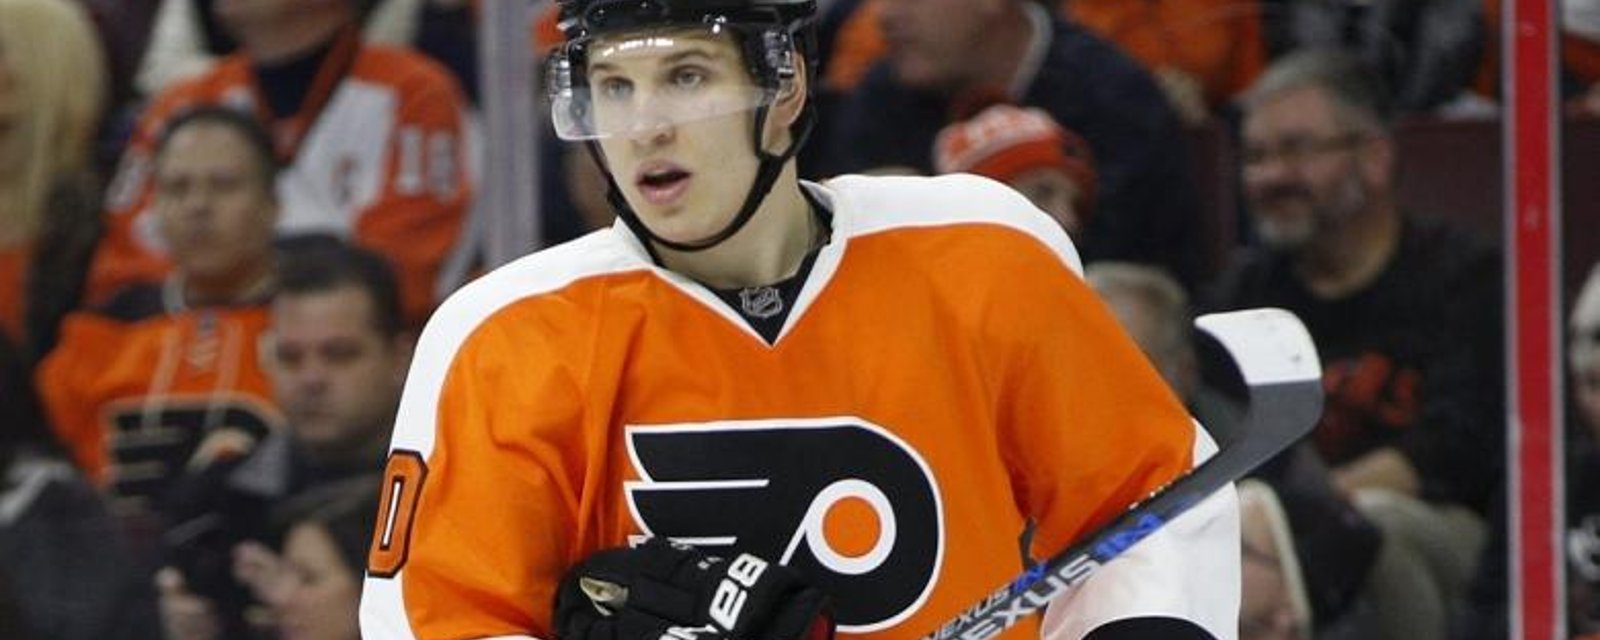 Report: Flyer's pay a hefty price to avoid arbitration.